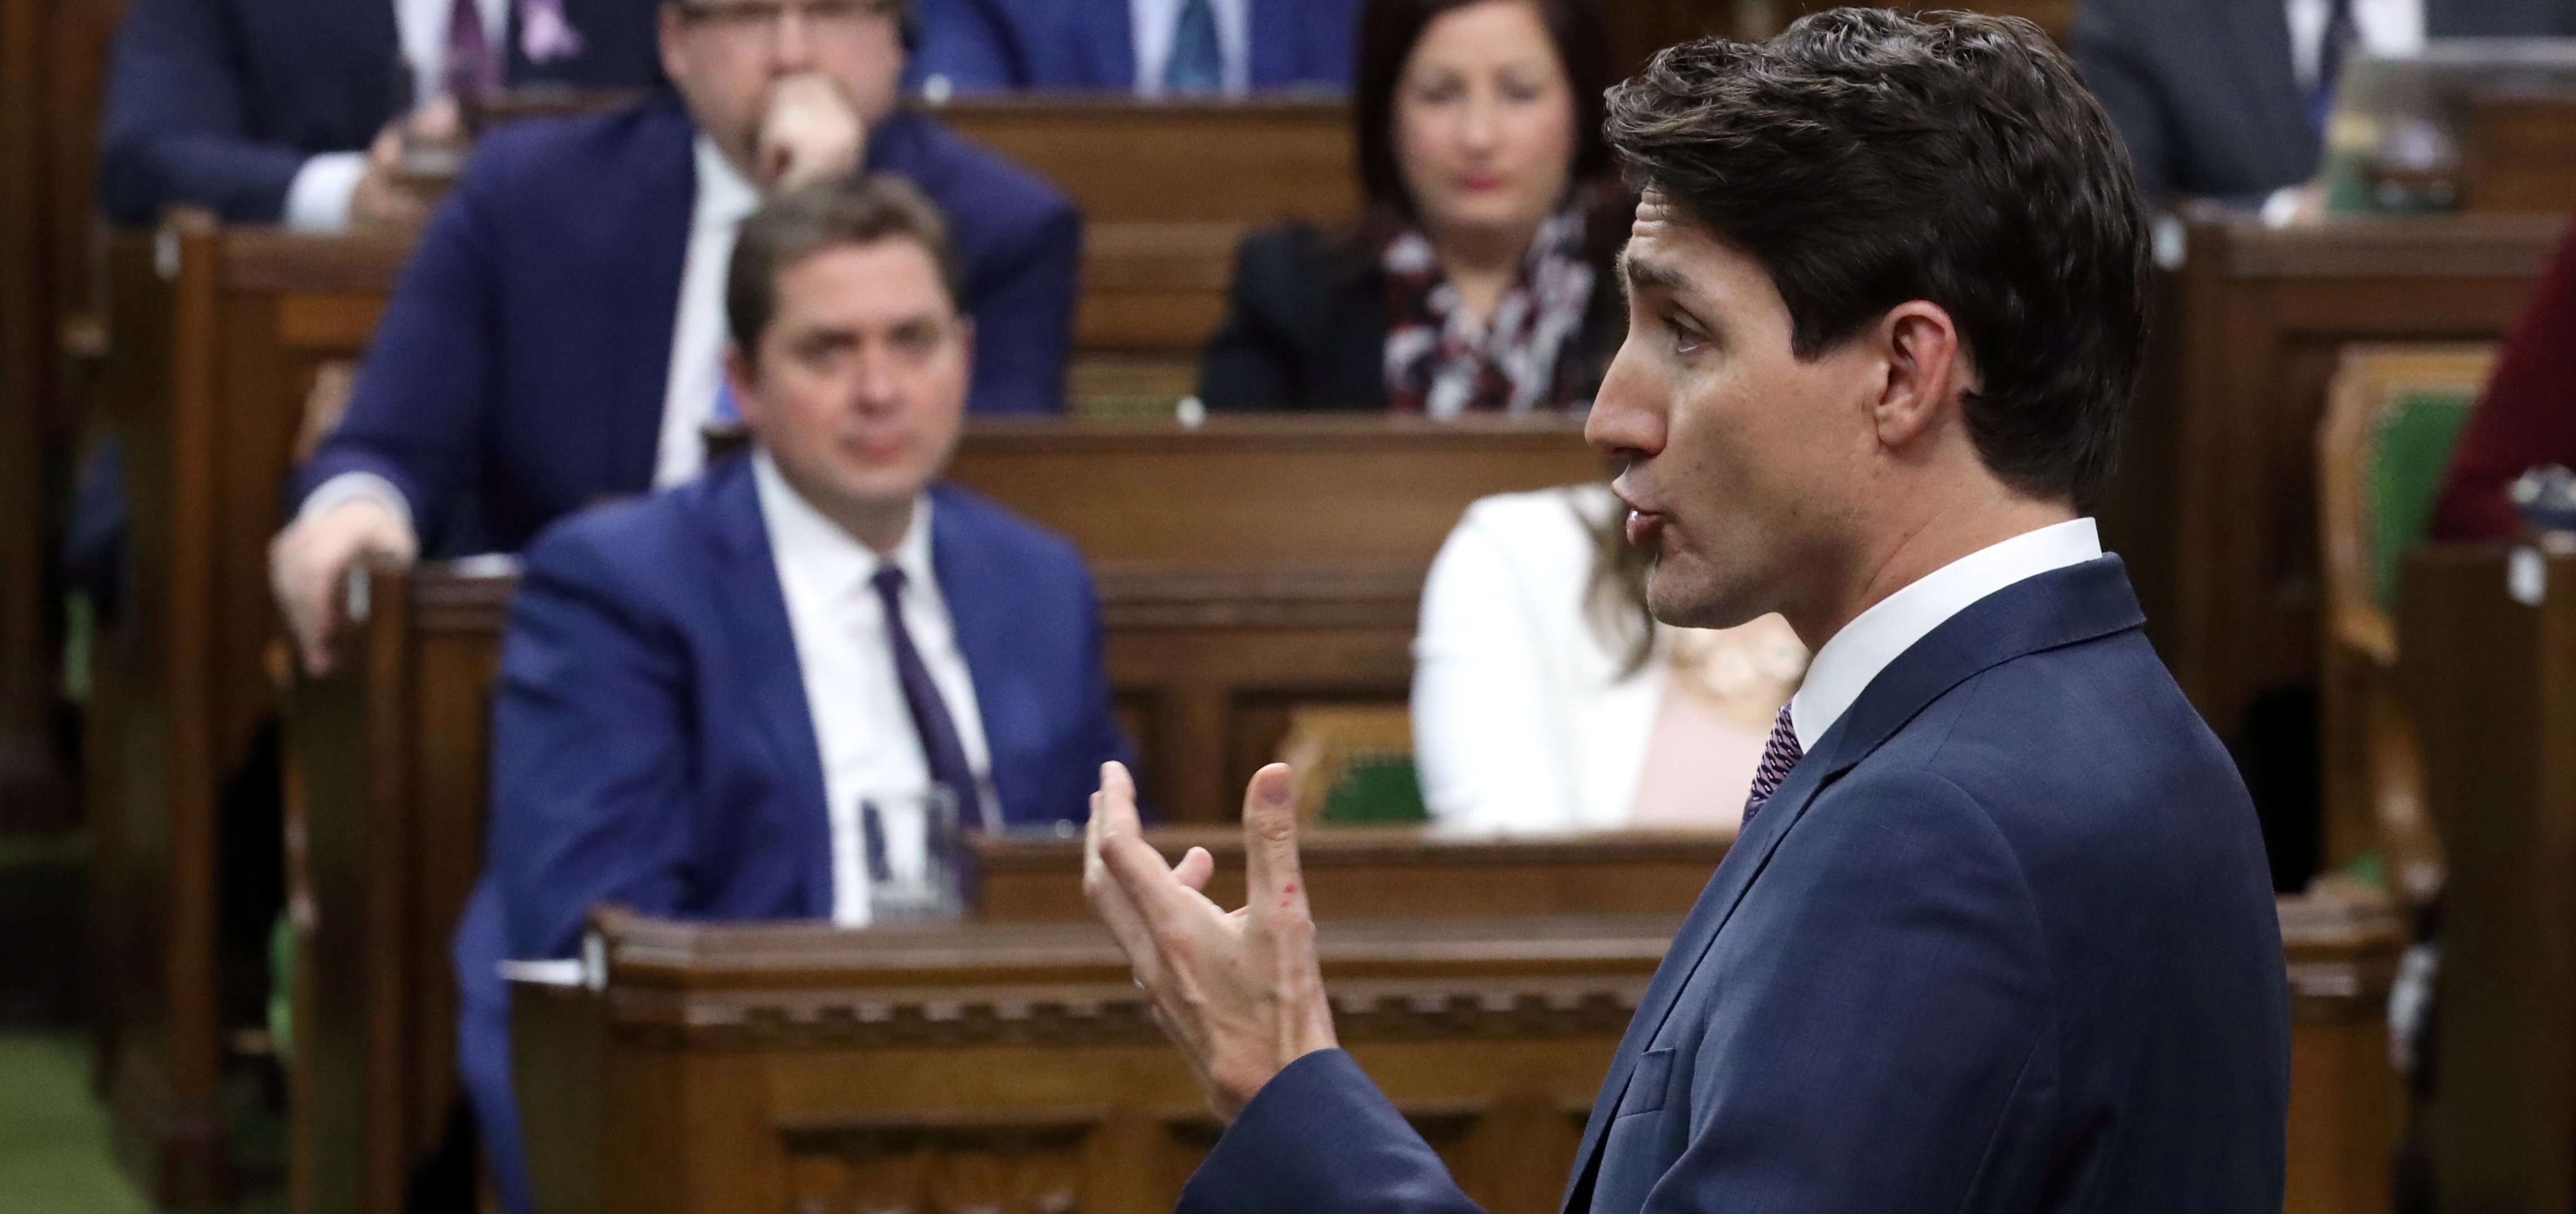 Canada's Prime Minister Justin Trudeau speaks during the Question Period in the House of Commons on Parliament Hill in Ottawa, Ontario, Canada, March 20, 2019. REUTERS/Chris Wattie